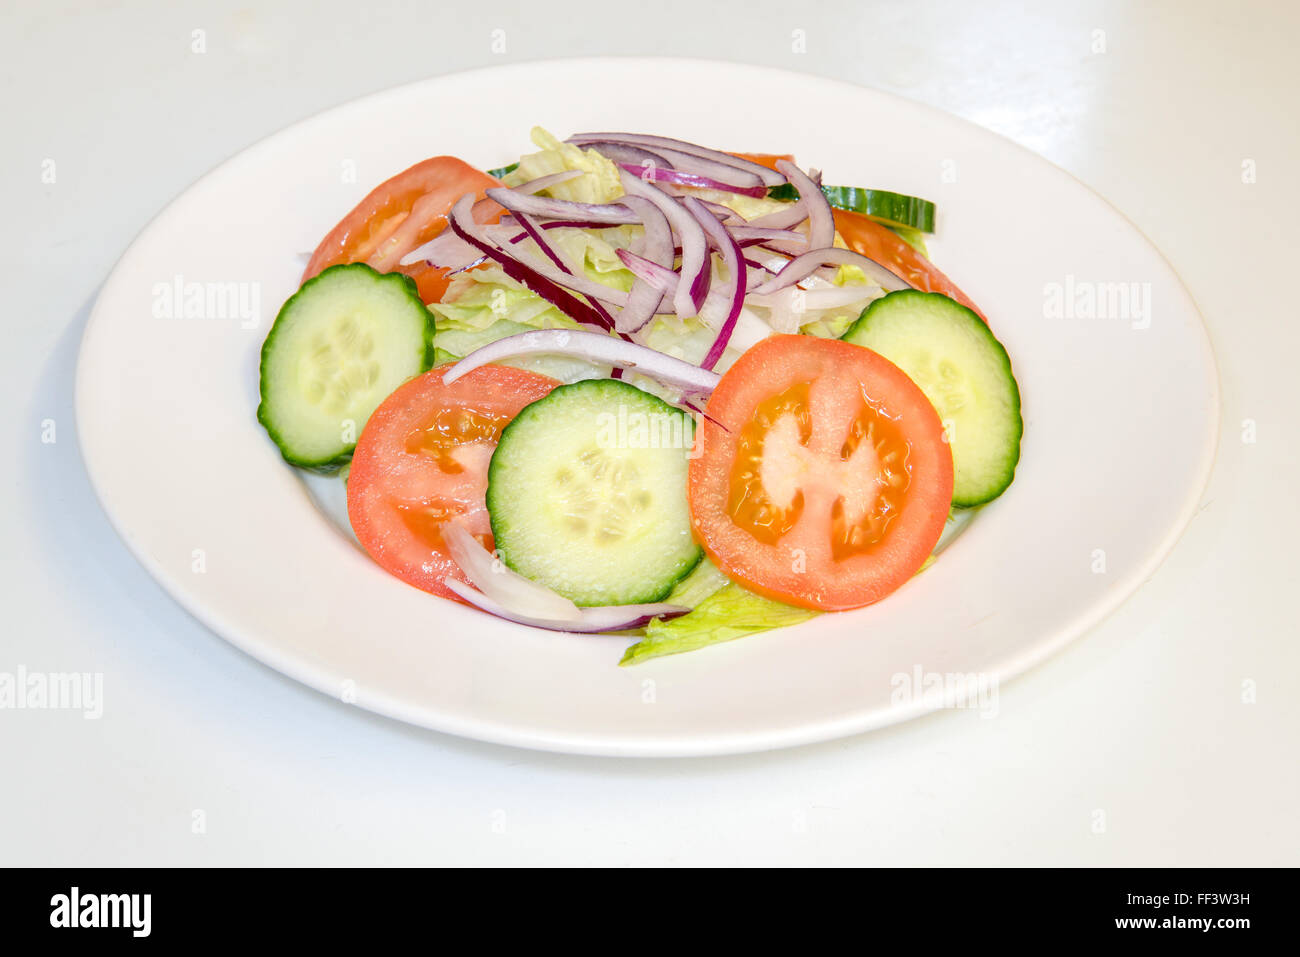 Large salad on a white plate Stock Photo